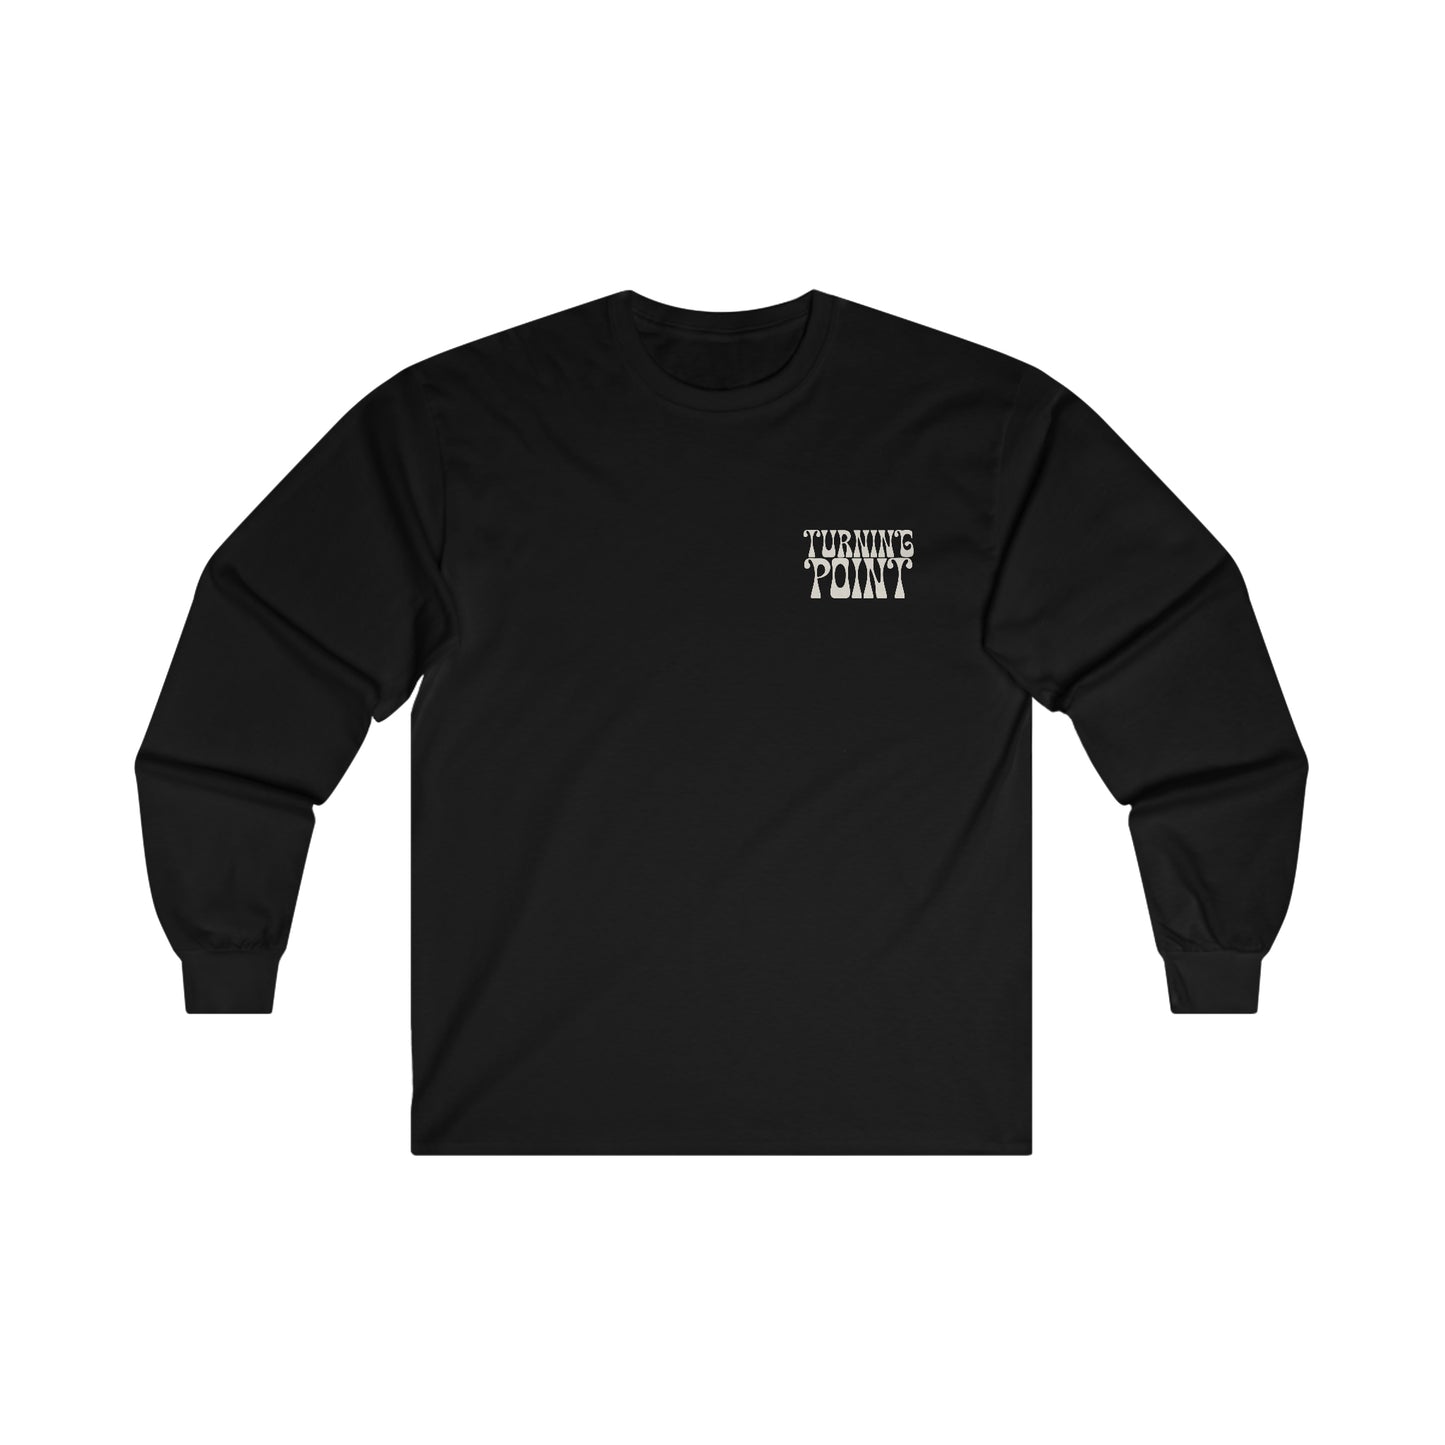 Come On Somebody Long Sleeve